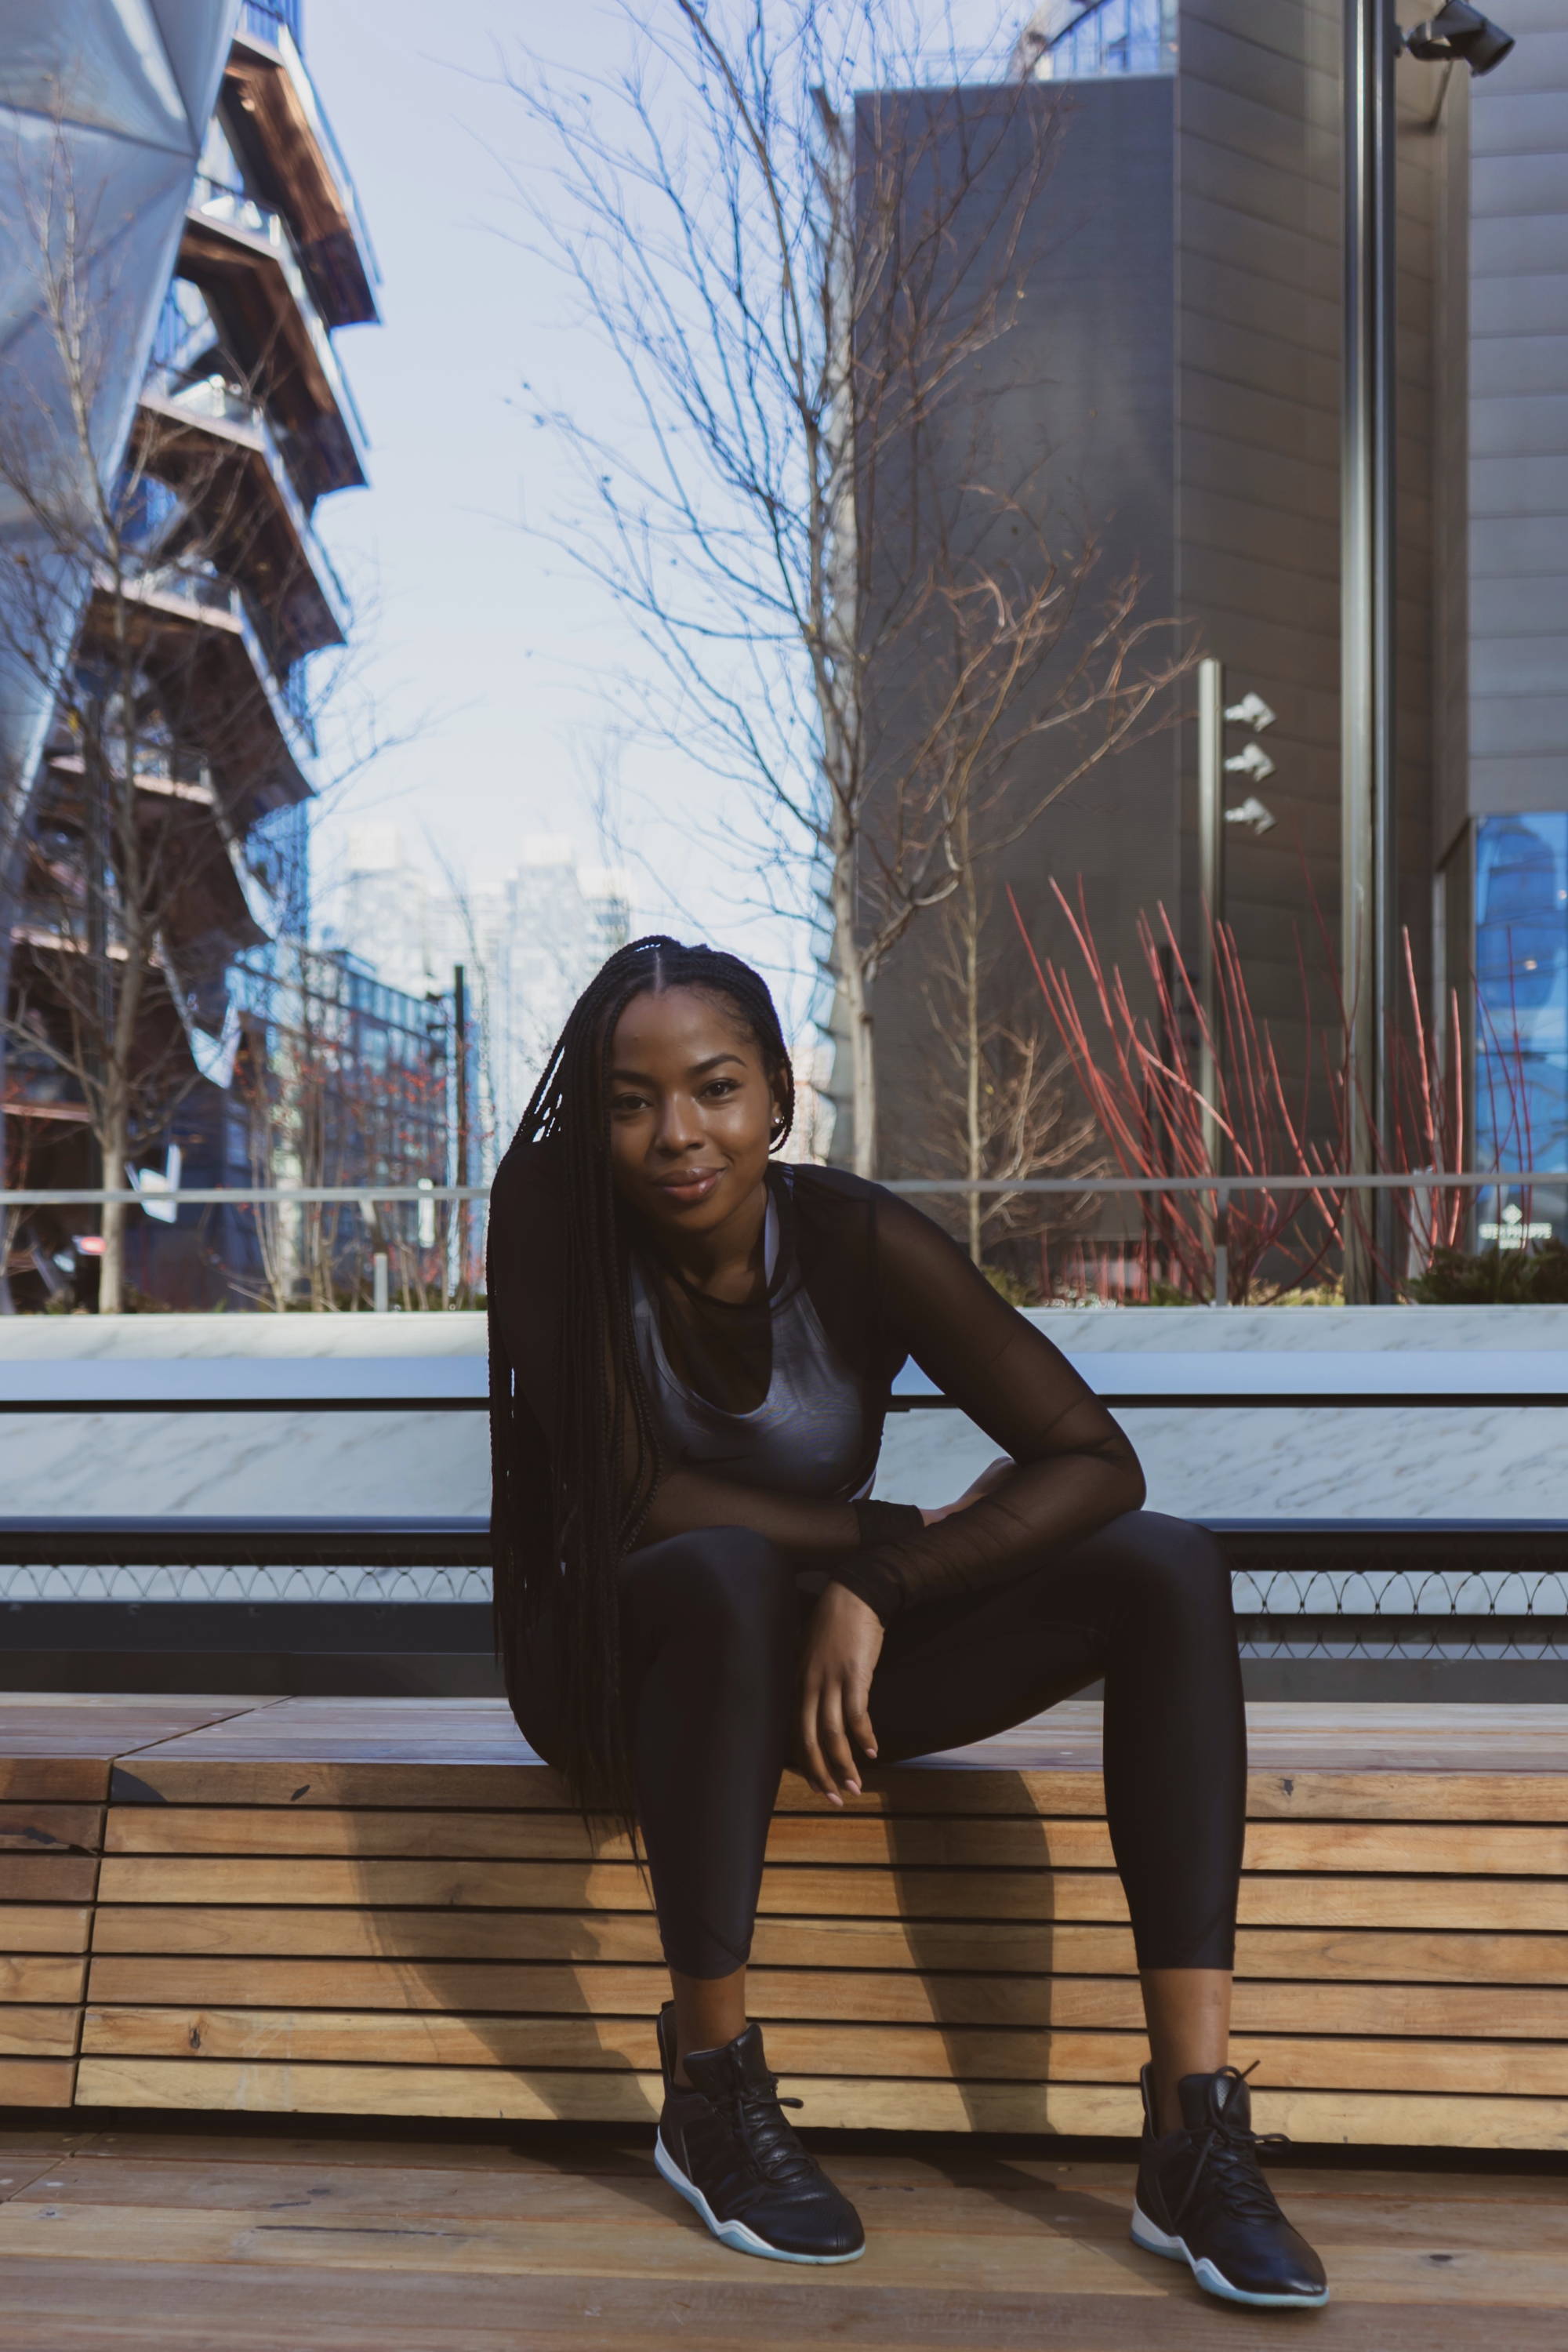 Kira West wearing Vobyo boxing sneakers in New York, posing on a bench